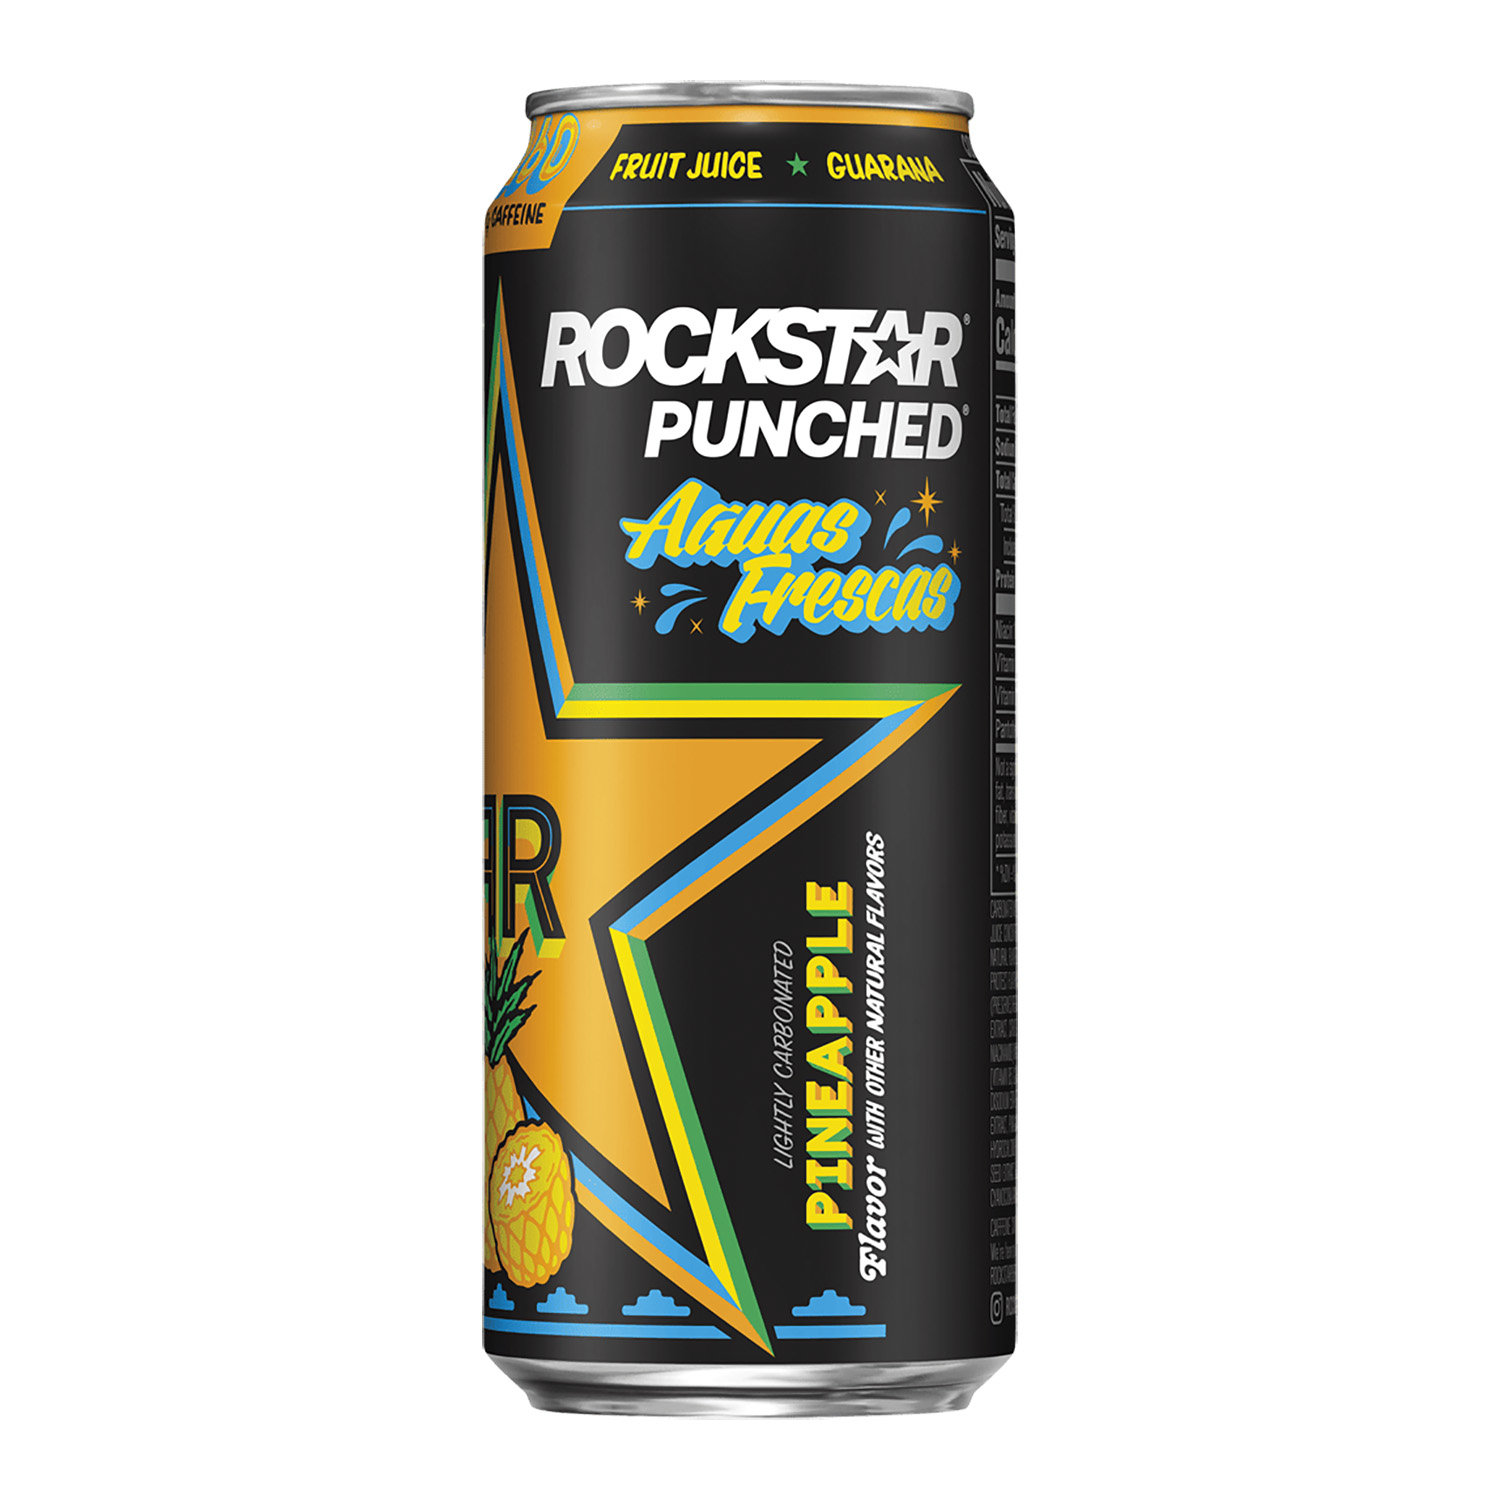 Rockstar Punched Aguas Frescas Pineapple - Foodland